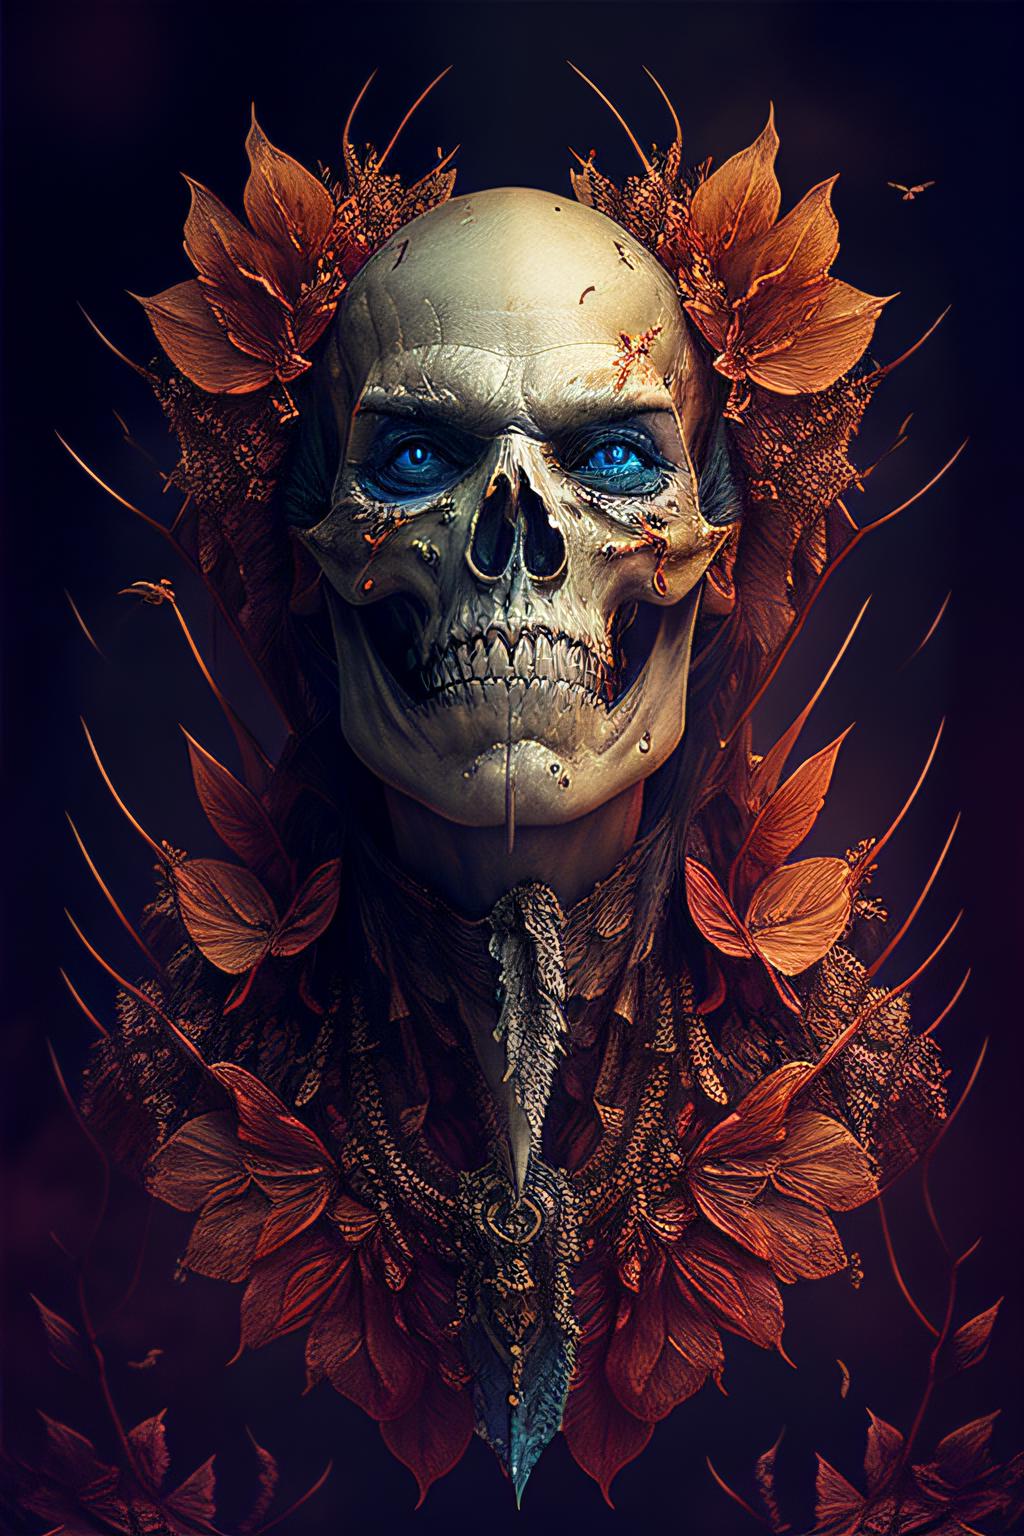 A skull with blue eyes, wearing a crown and necklace, surrounded by flowers.